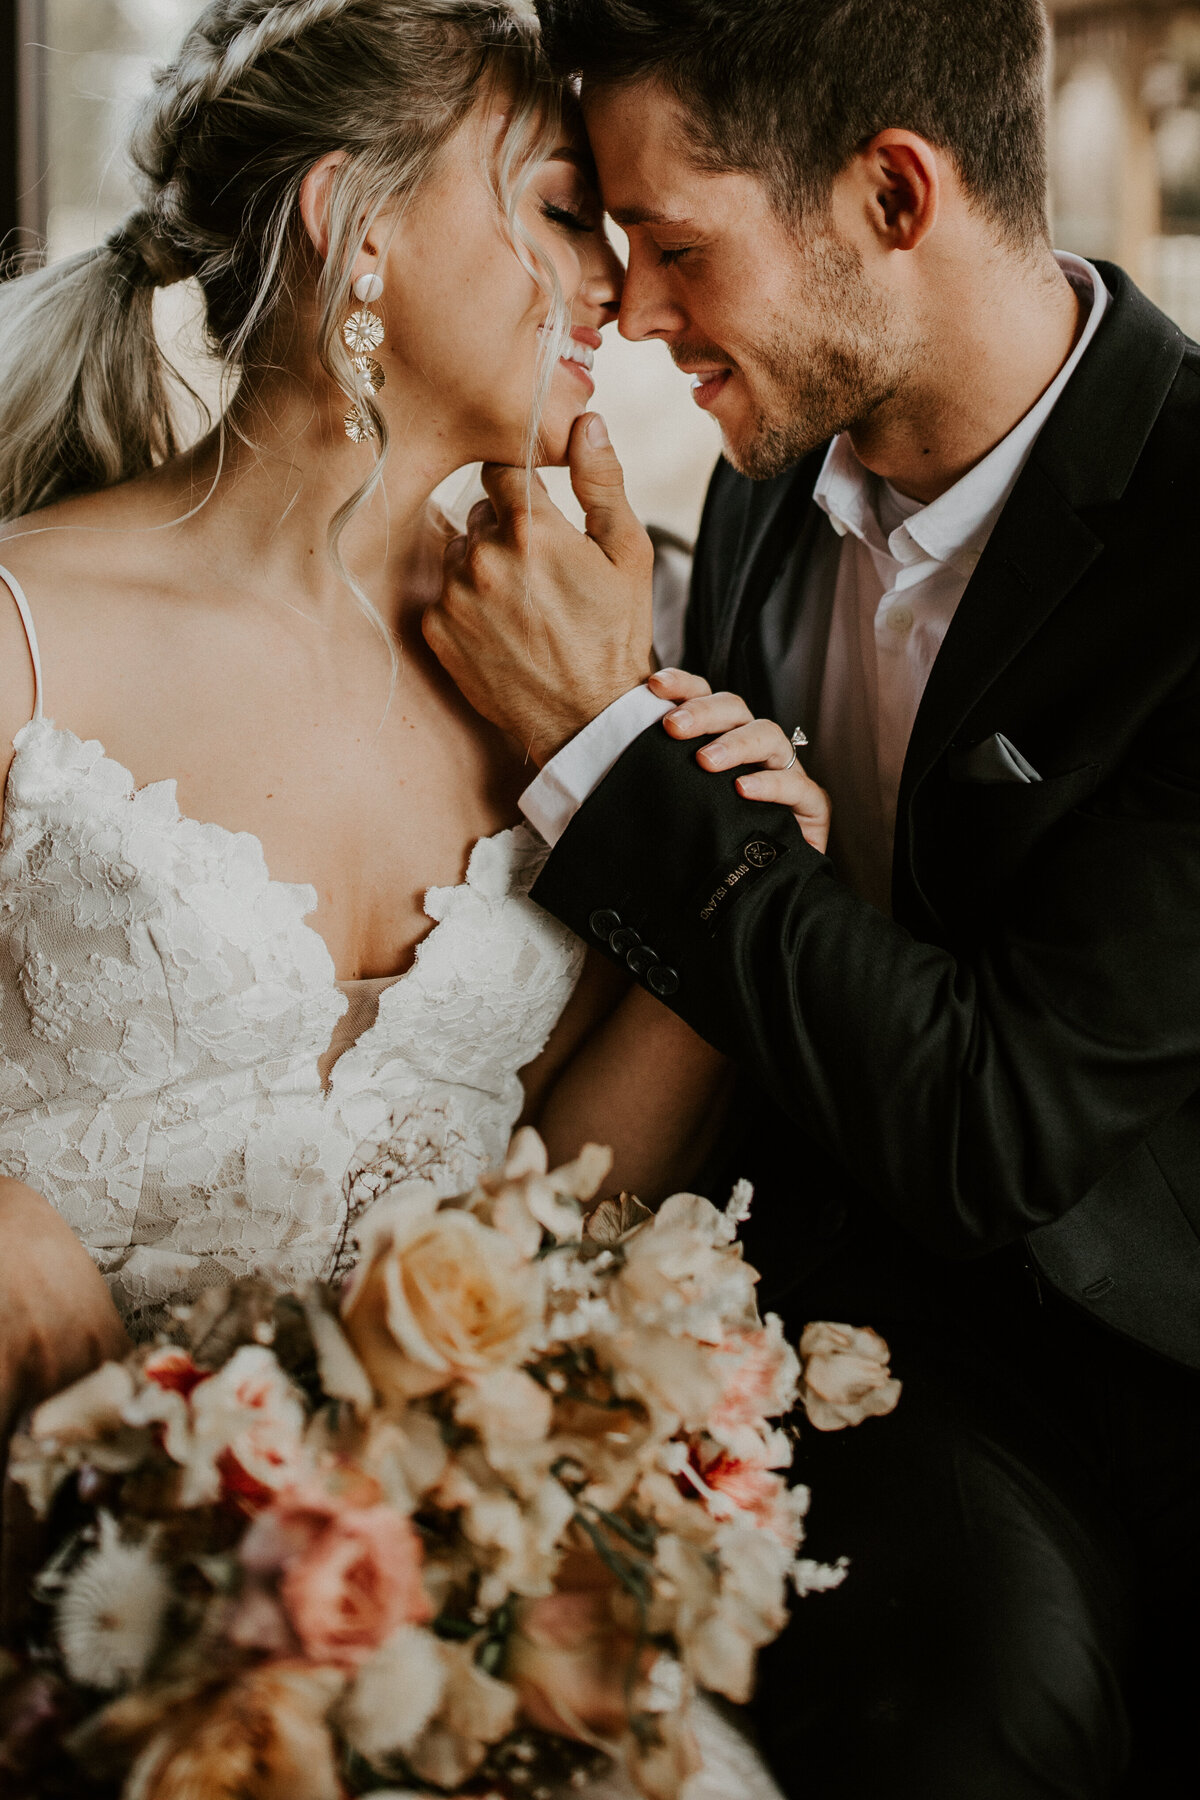 A bride and groom wearing a white wedding gown and black suit lean in for a kiss with blush and yellow bouquet of flowers.